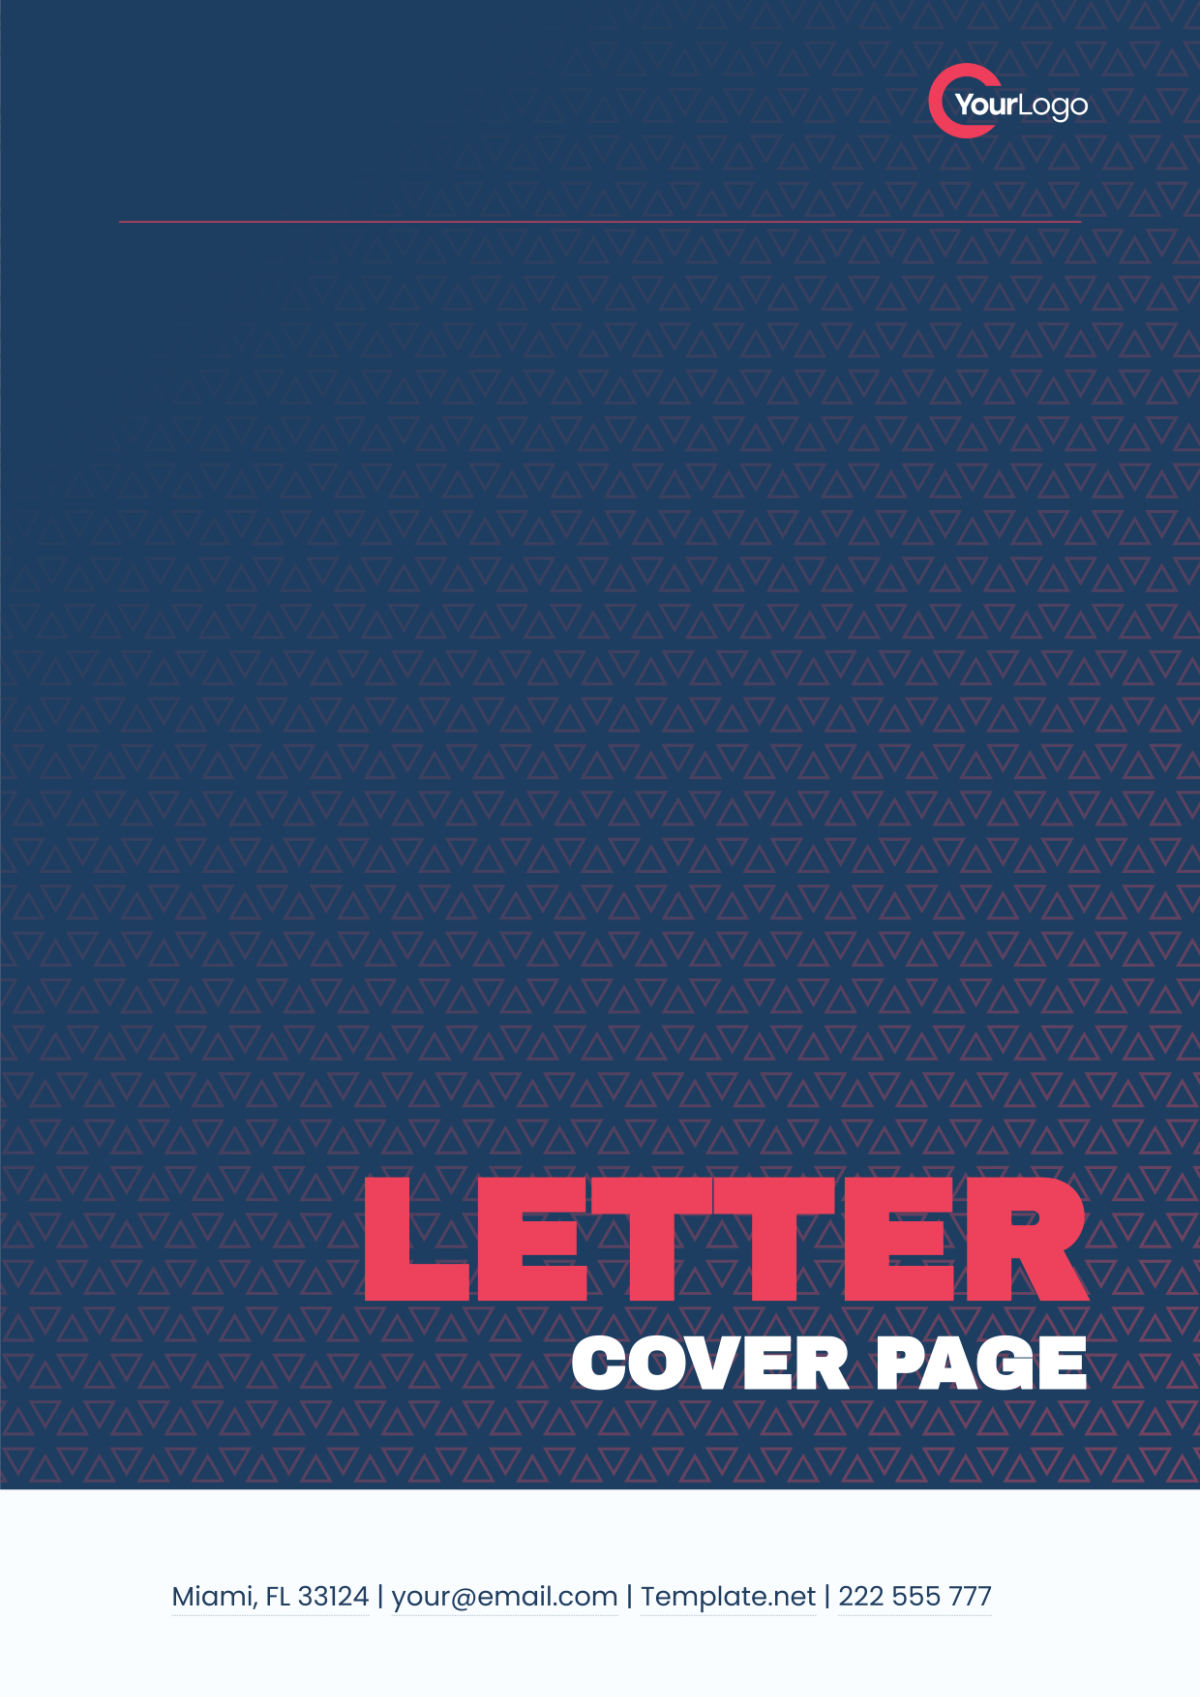 Letter Cover Page Logo